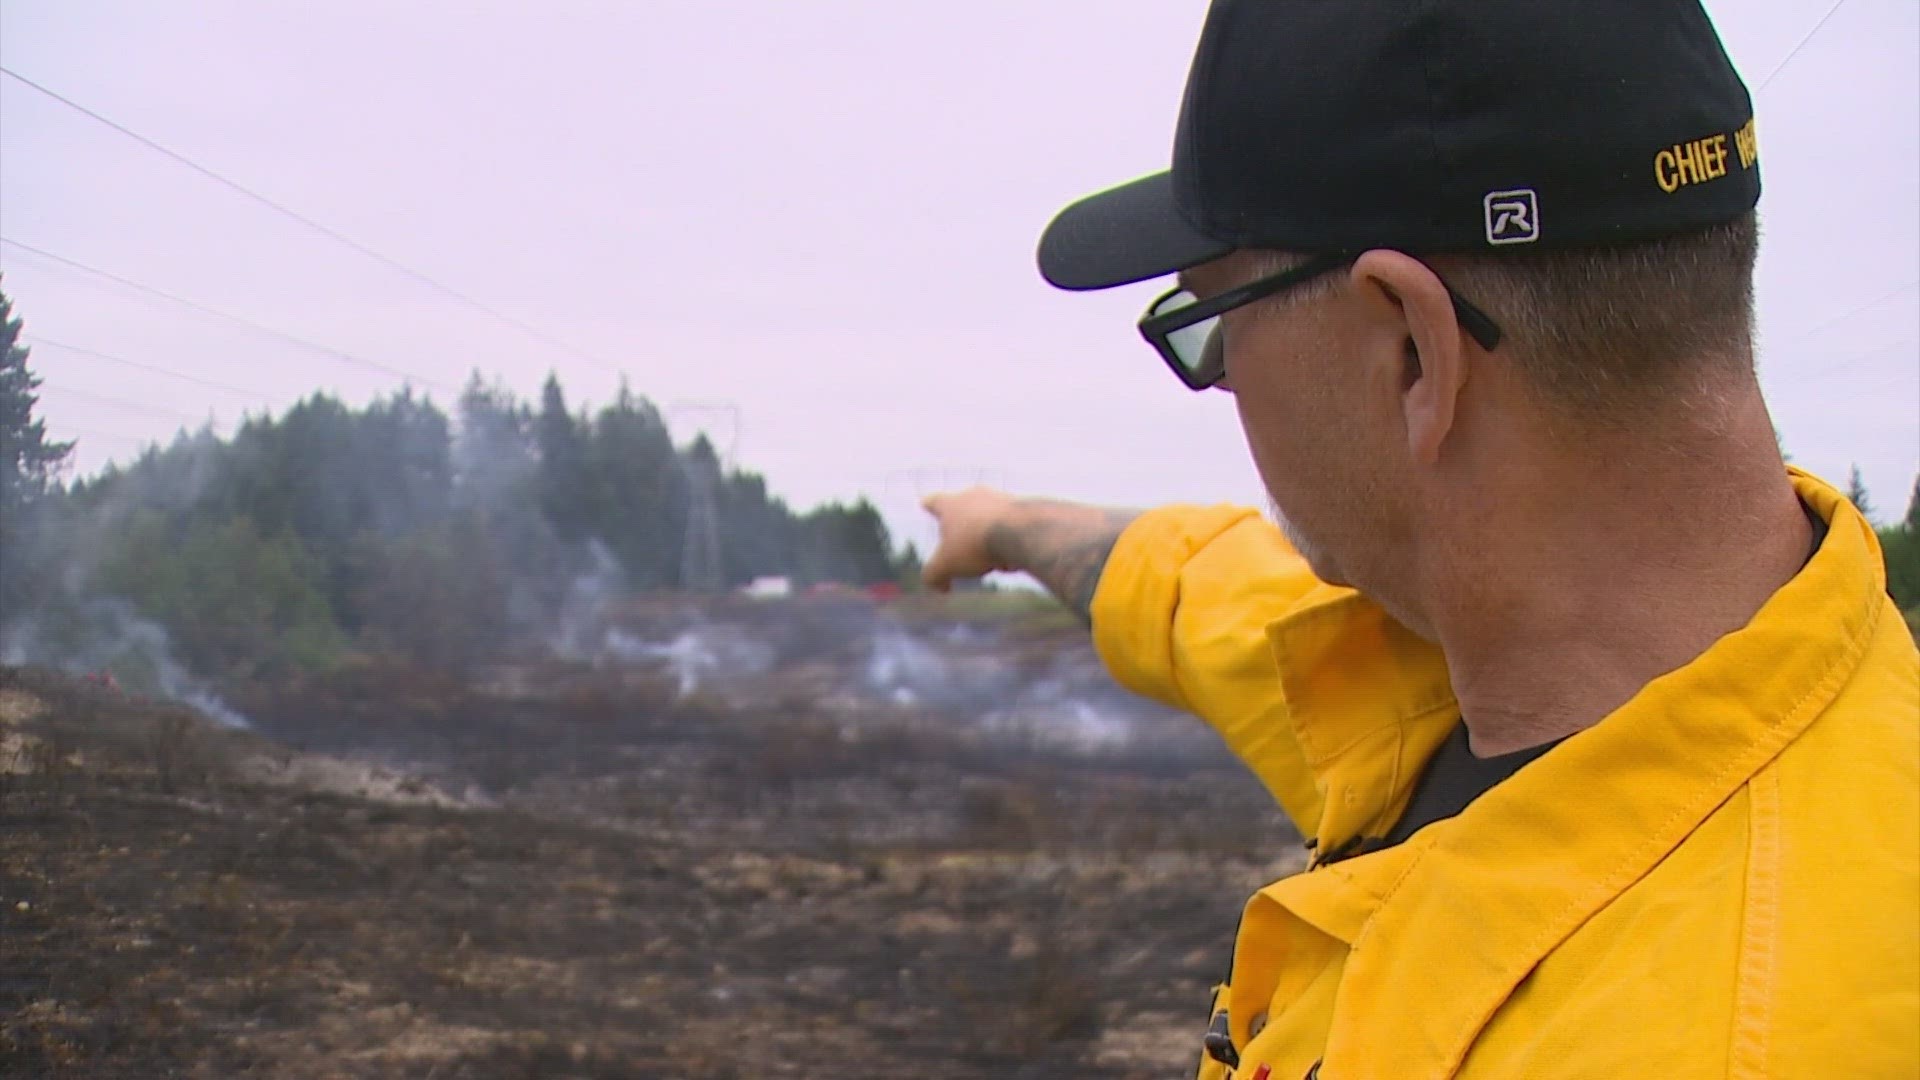 A brush fire in South Pierce County exemplified how interagency partnerships and the use of aircraft can keep small fires from growing much more dangerous.